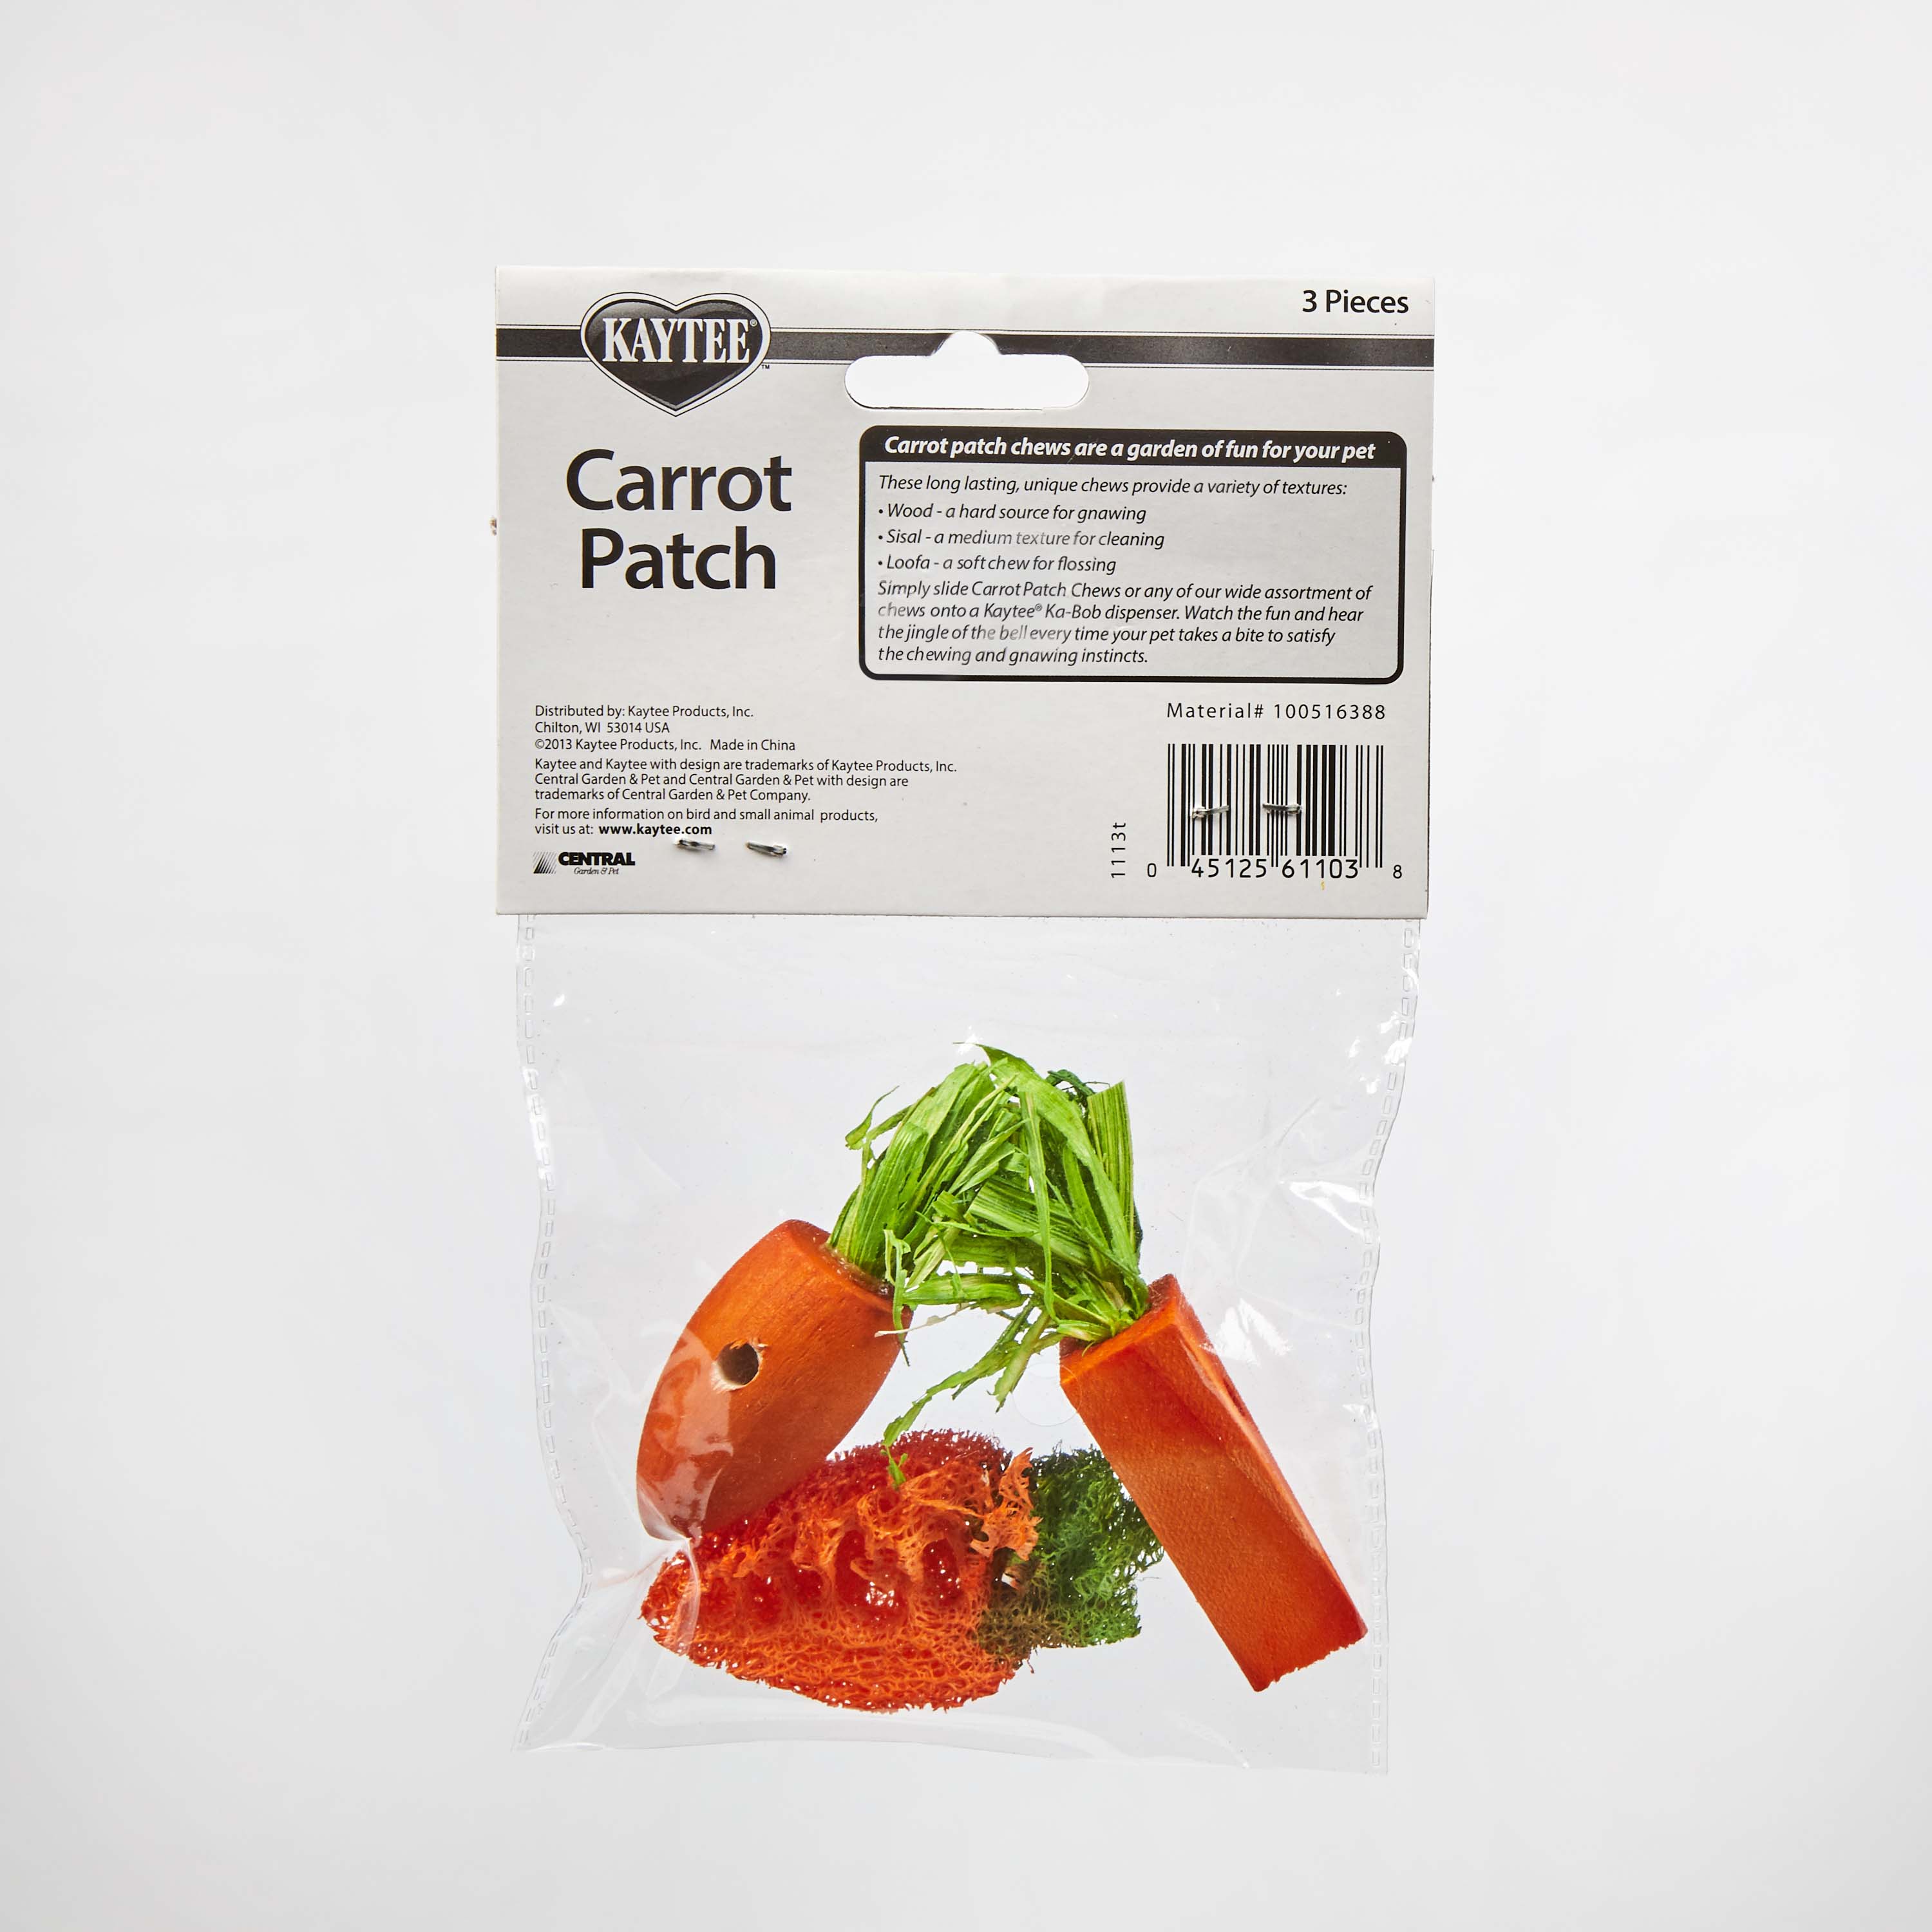 Kaytee Chew Toy Carrot Patch Back of Package